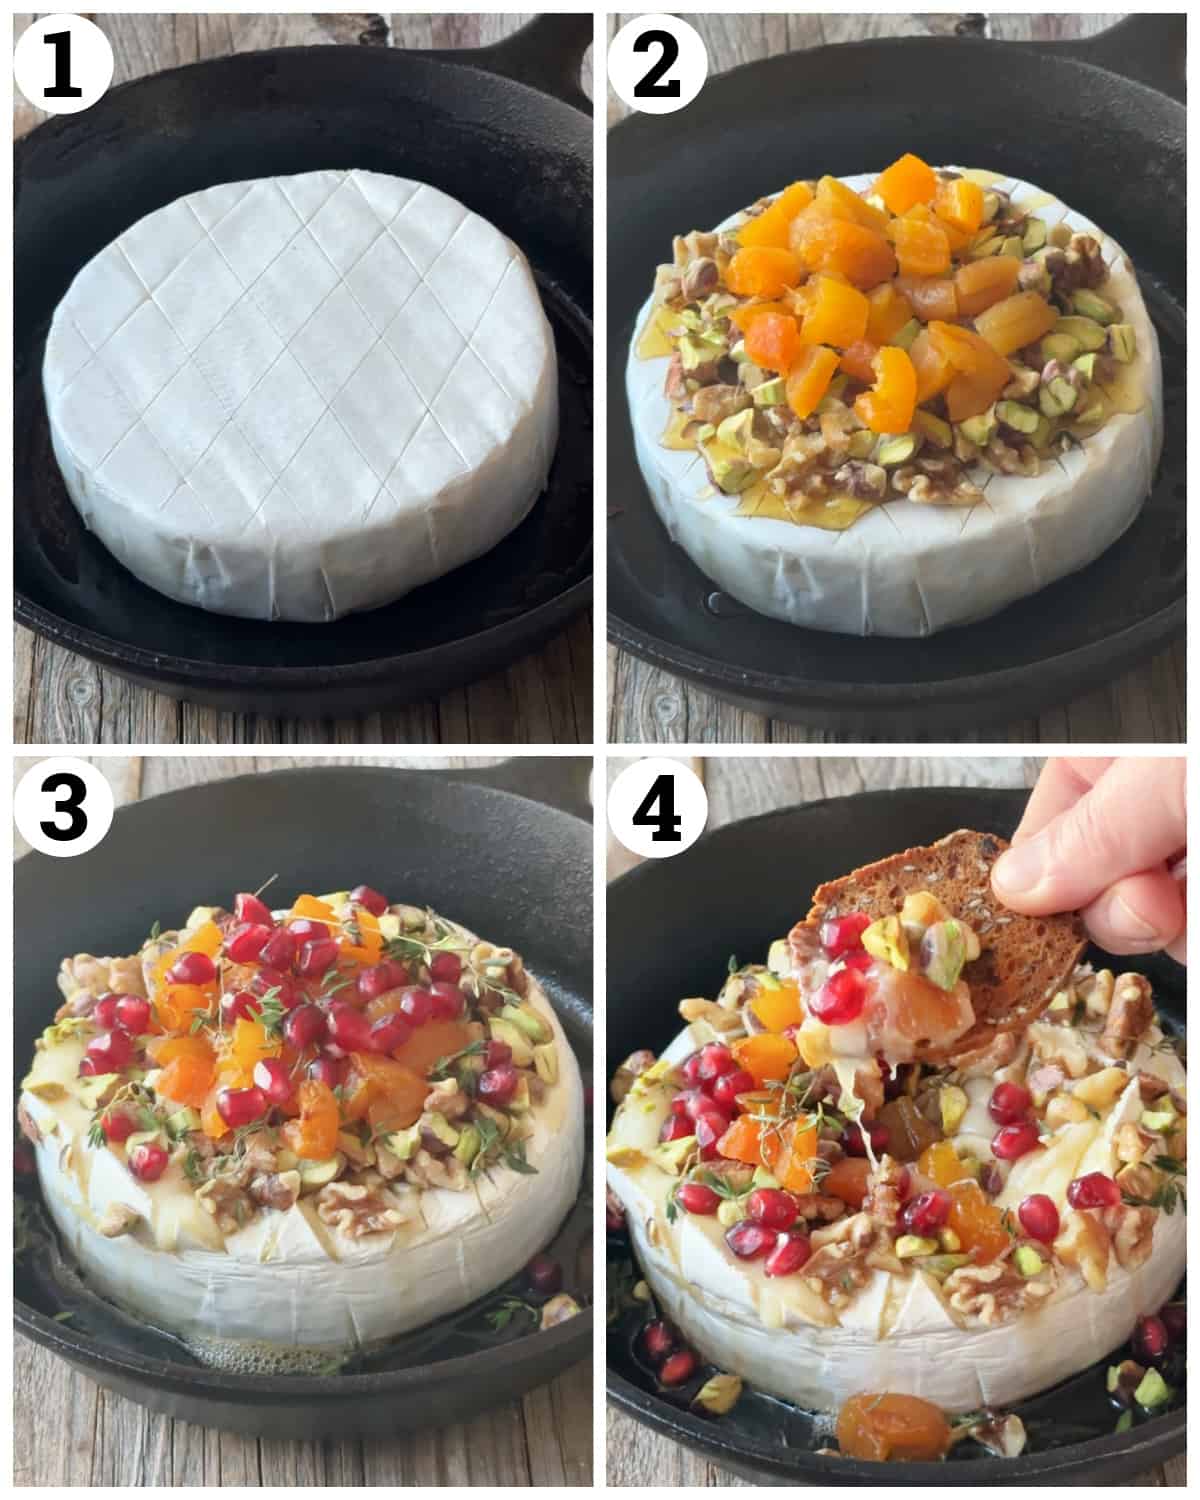 Cut the brie on top and top with honey and nuts then dried fruit. Bake and then top with pomegranate. 